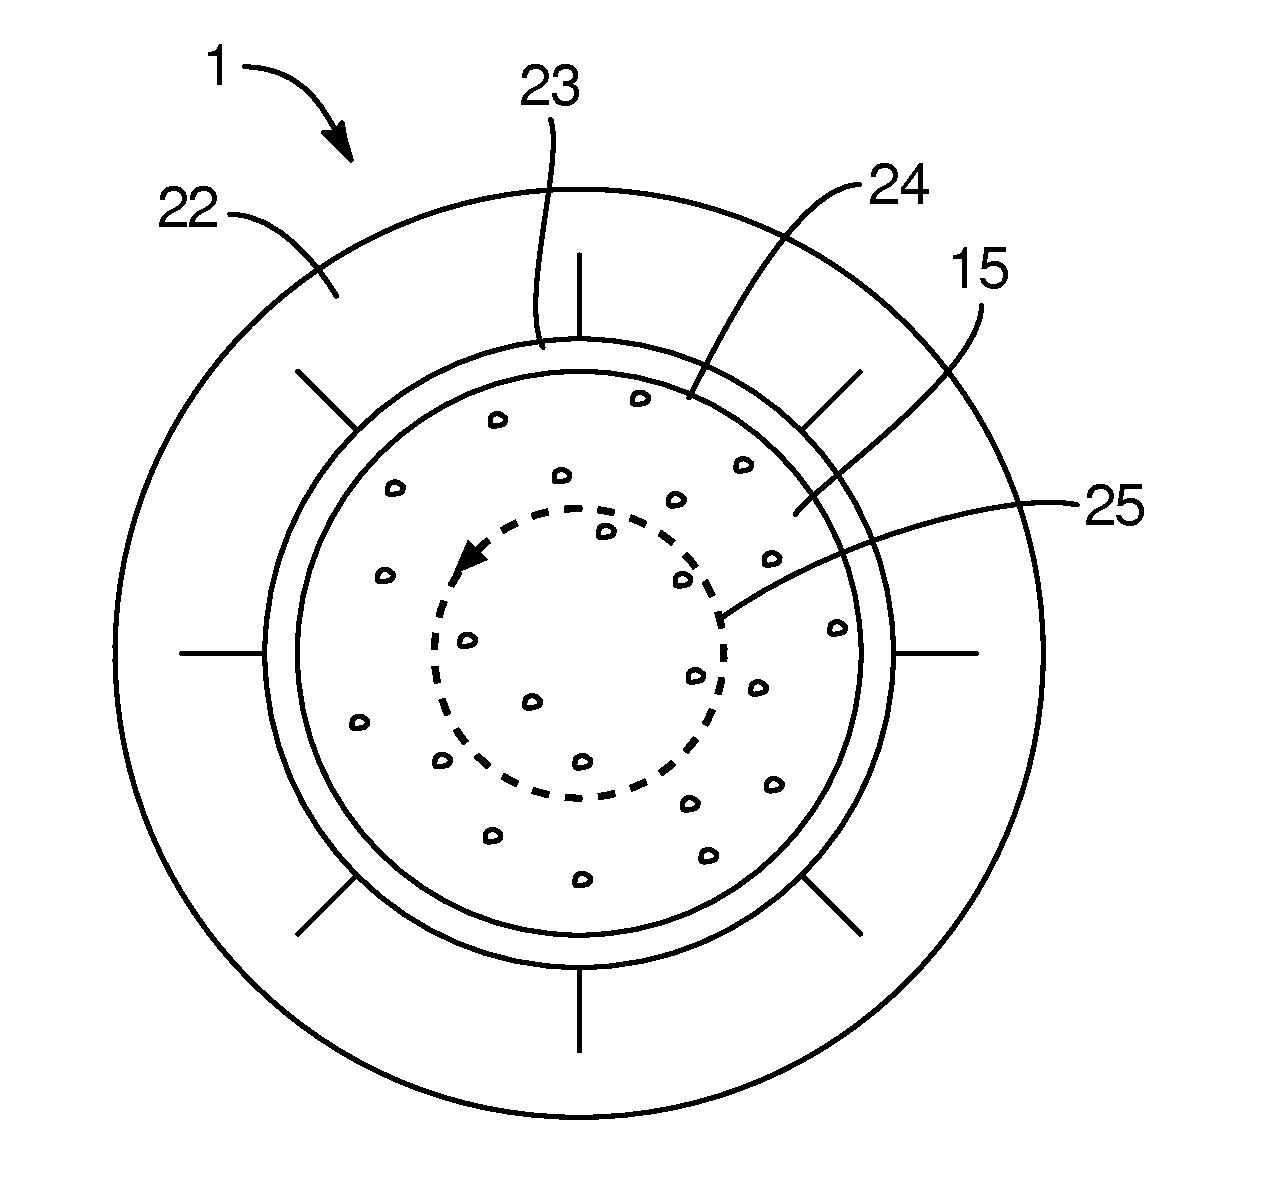 Systems and methods for diffusing gas into a liquid